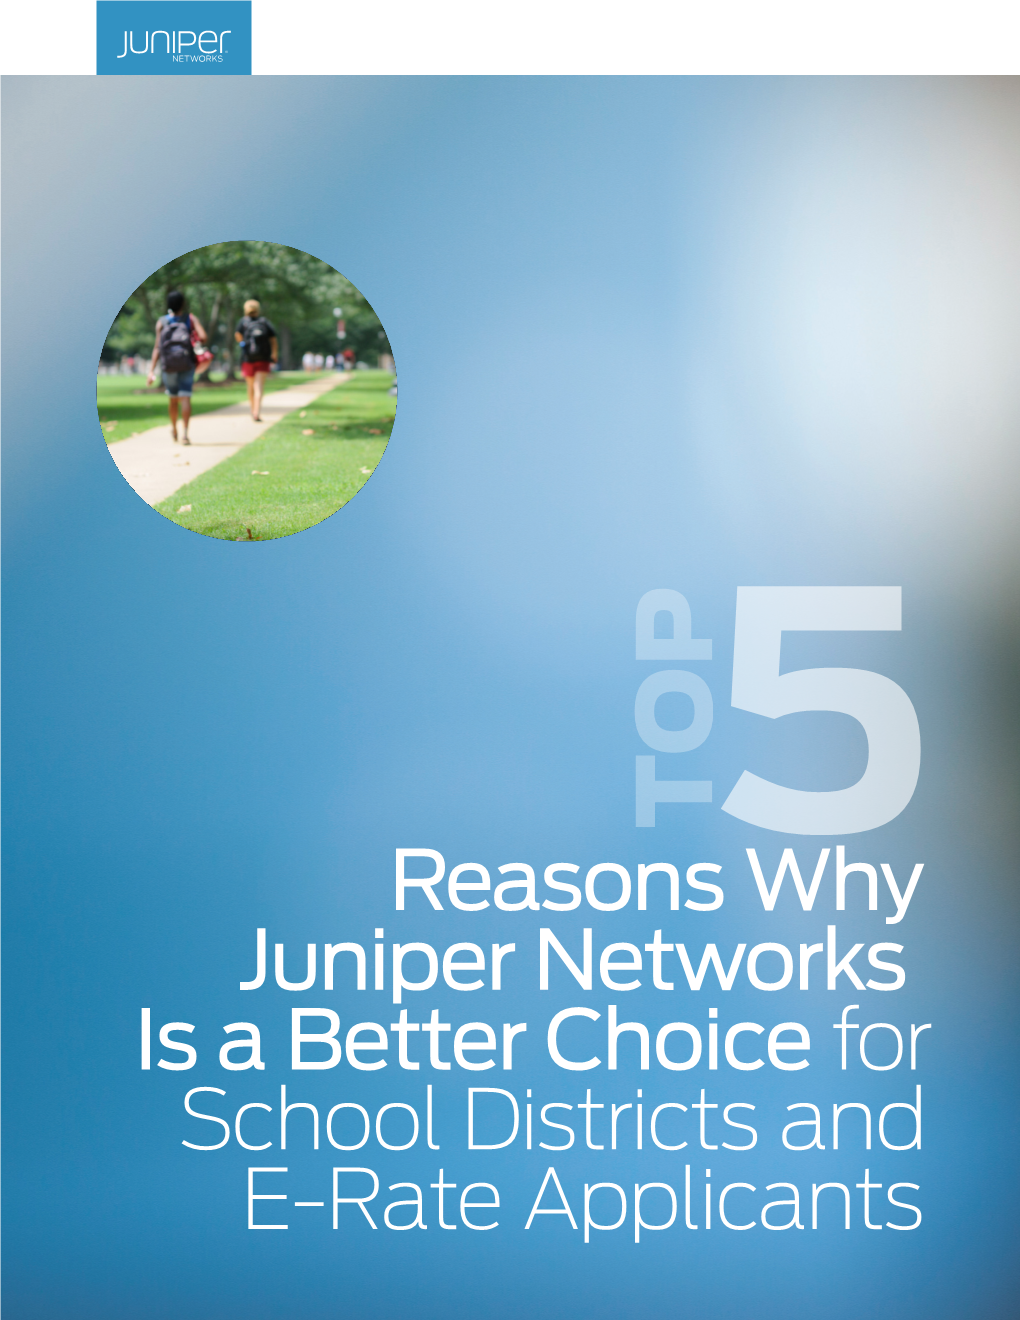 Reasons Why Juniper Networks Is a Better Choice for School Districts